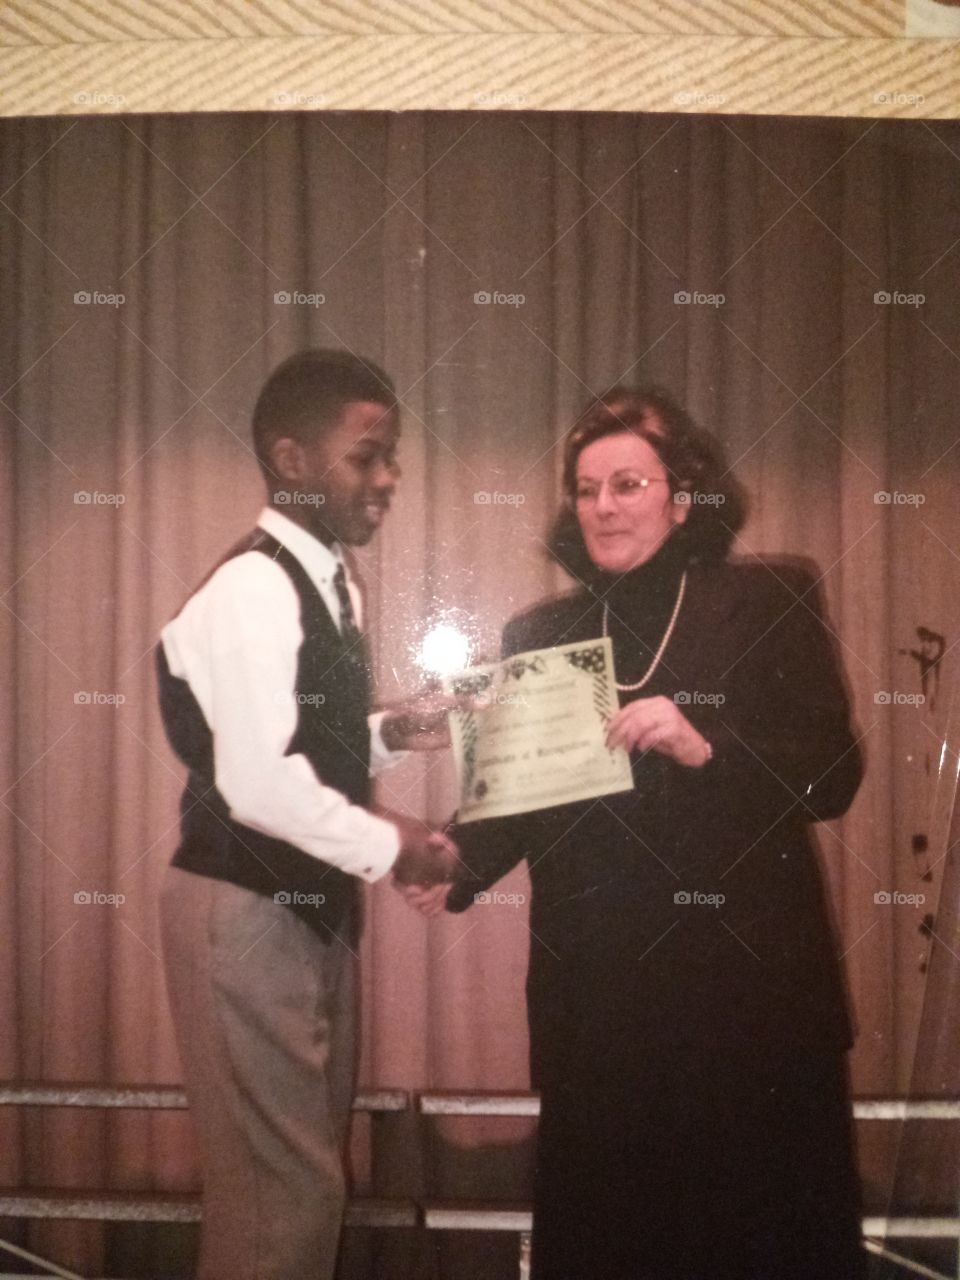 me at age 12 receiving an award from the prinicpal in elementary